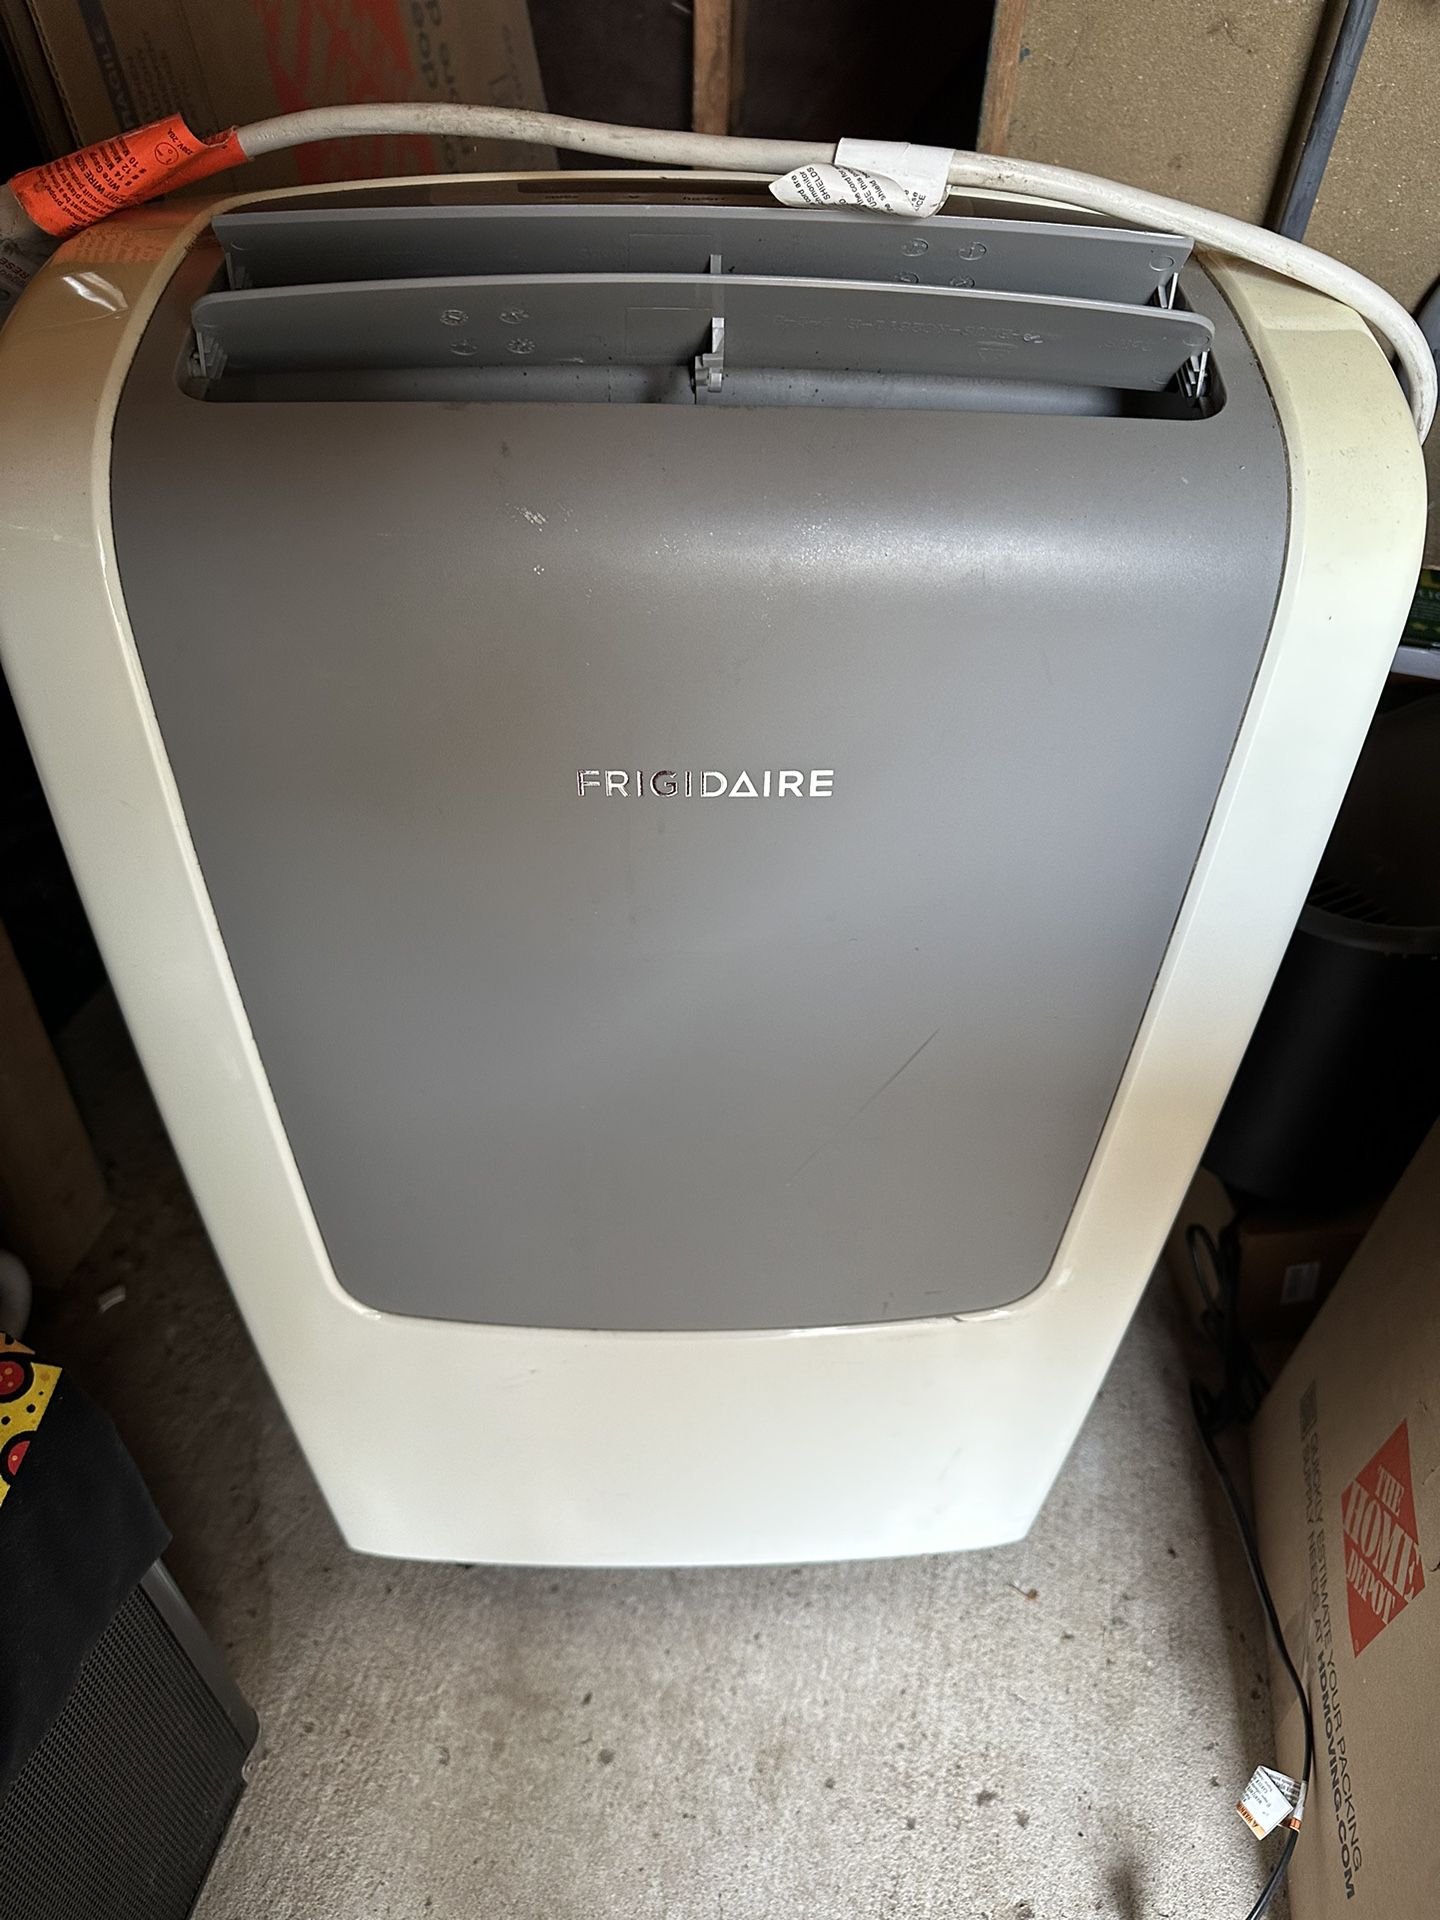 SELLING FRIGIDAIRE FRA123PT1 PORTABLE AIR CONDITIONER W/REMOTE CONTROL